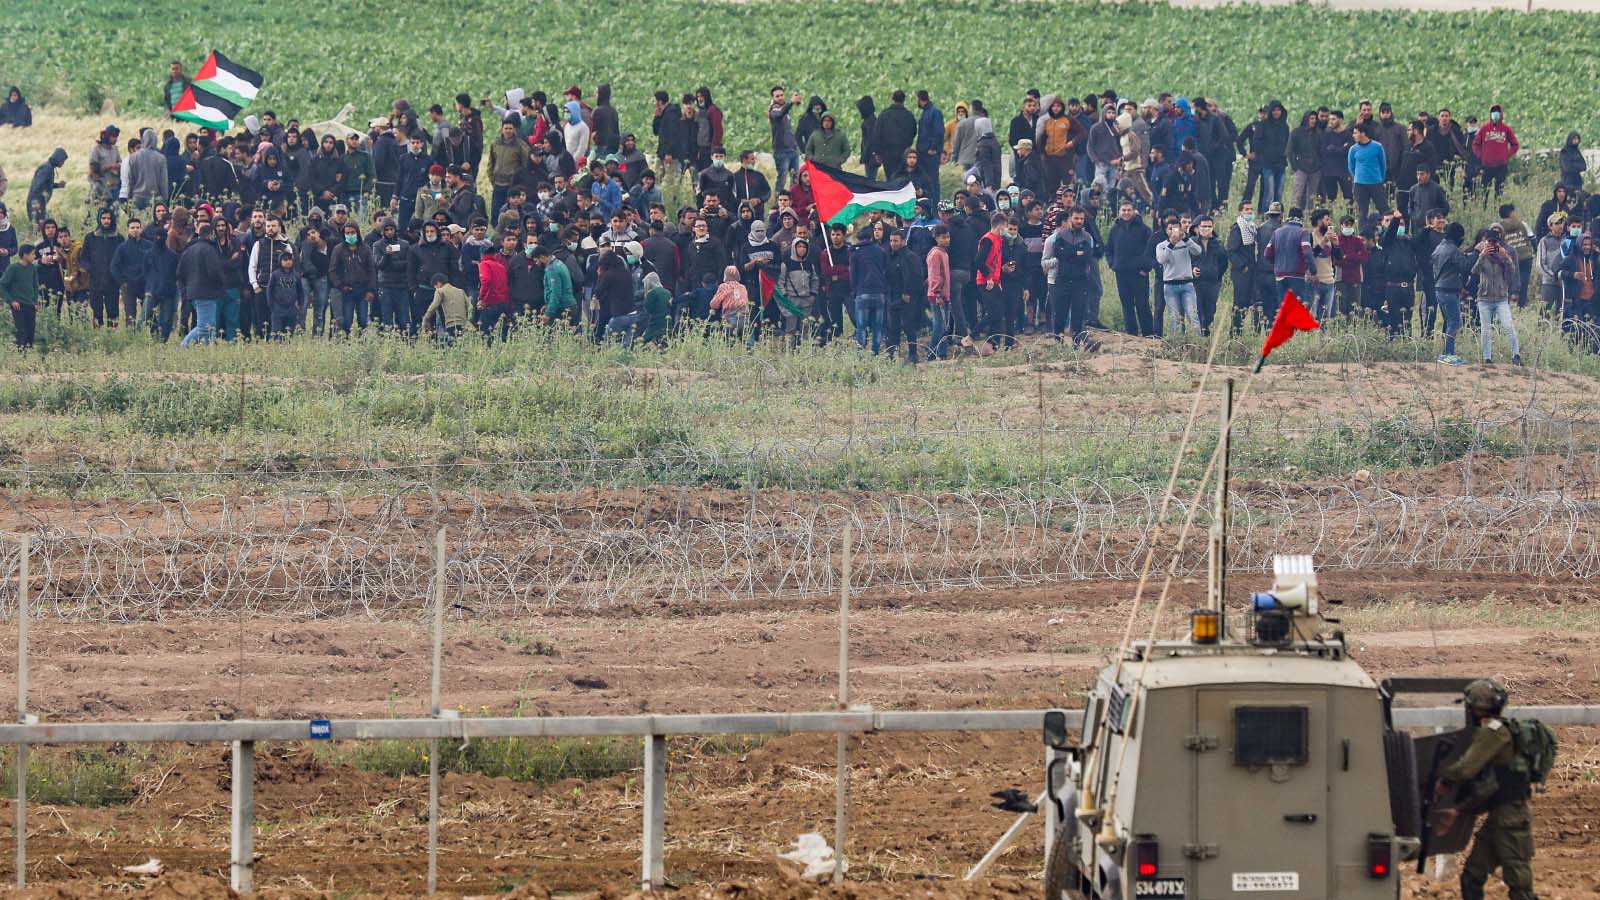 March of Return demonstrations in front of the border fence with the Gaza Strip, March 30, 2019 (Photo: Noam Rivkin Fenton/Flash90)